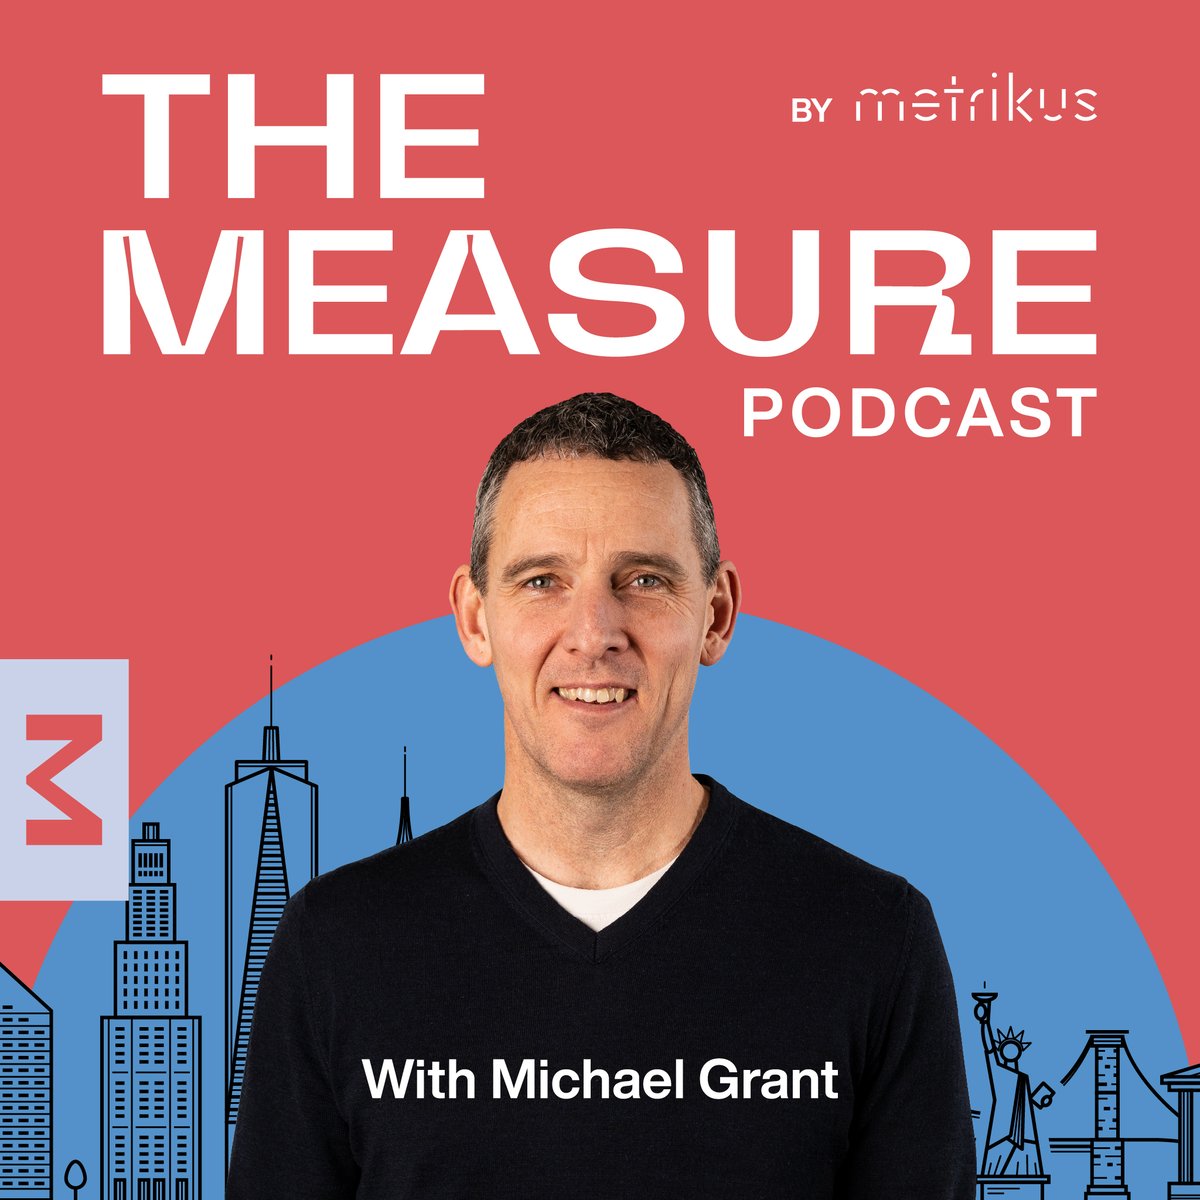 The Measure Podcast